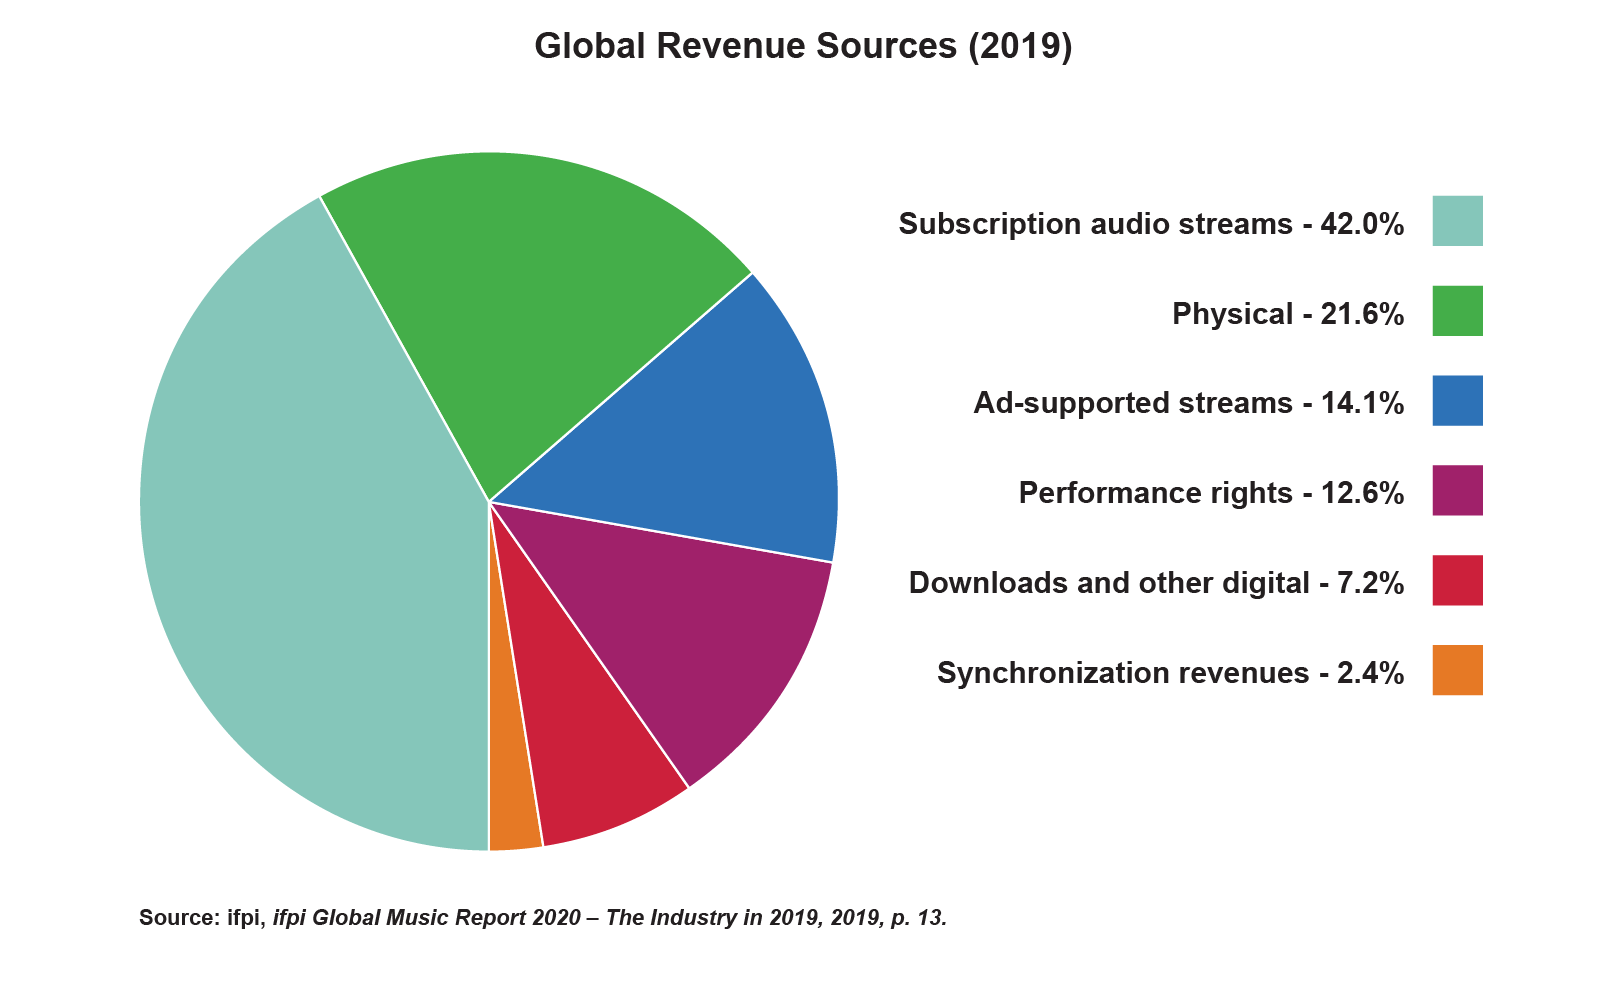 A pie chart depicting the global music industry revenue sources in 2019. The highest percentage is subscription audio streams at 42%, followed by physical at 21.6%, ad-supported streams at 14.1%, performance rights at 12.6%, downloads and other digital at 7.2%, and synchronization revenues at 2.4%.